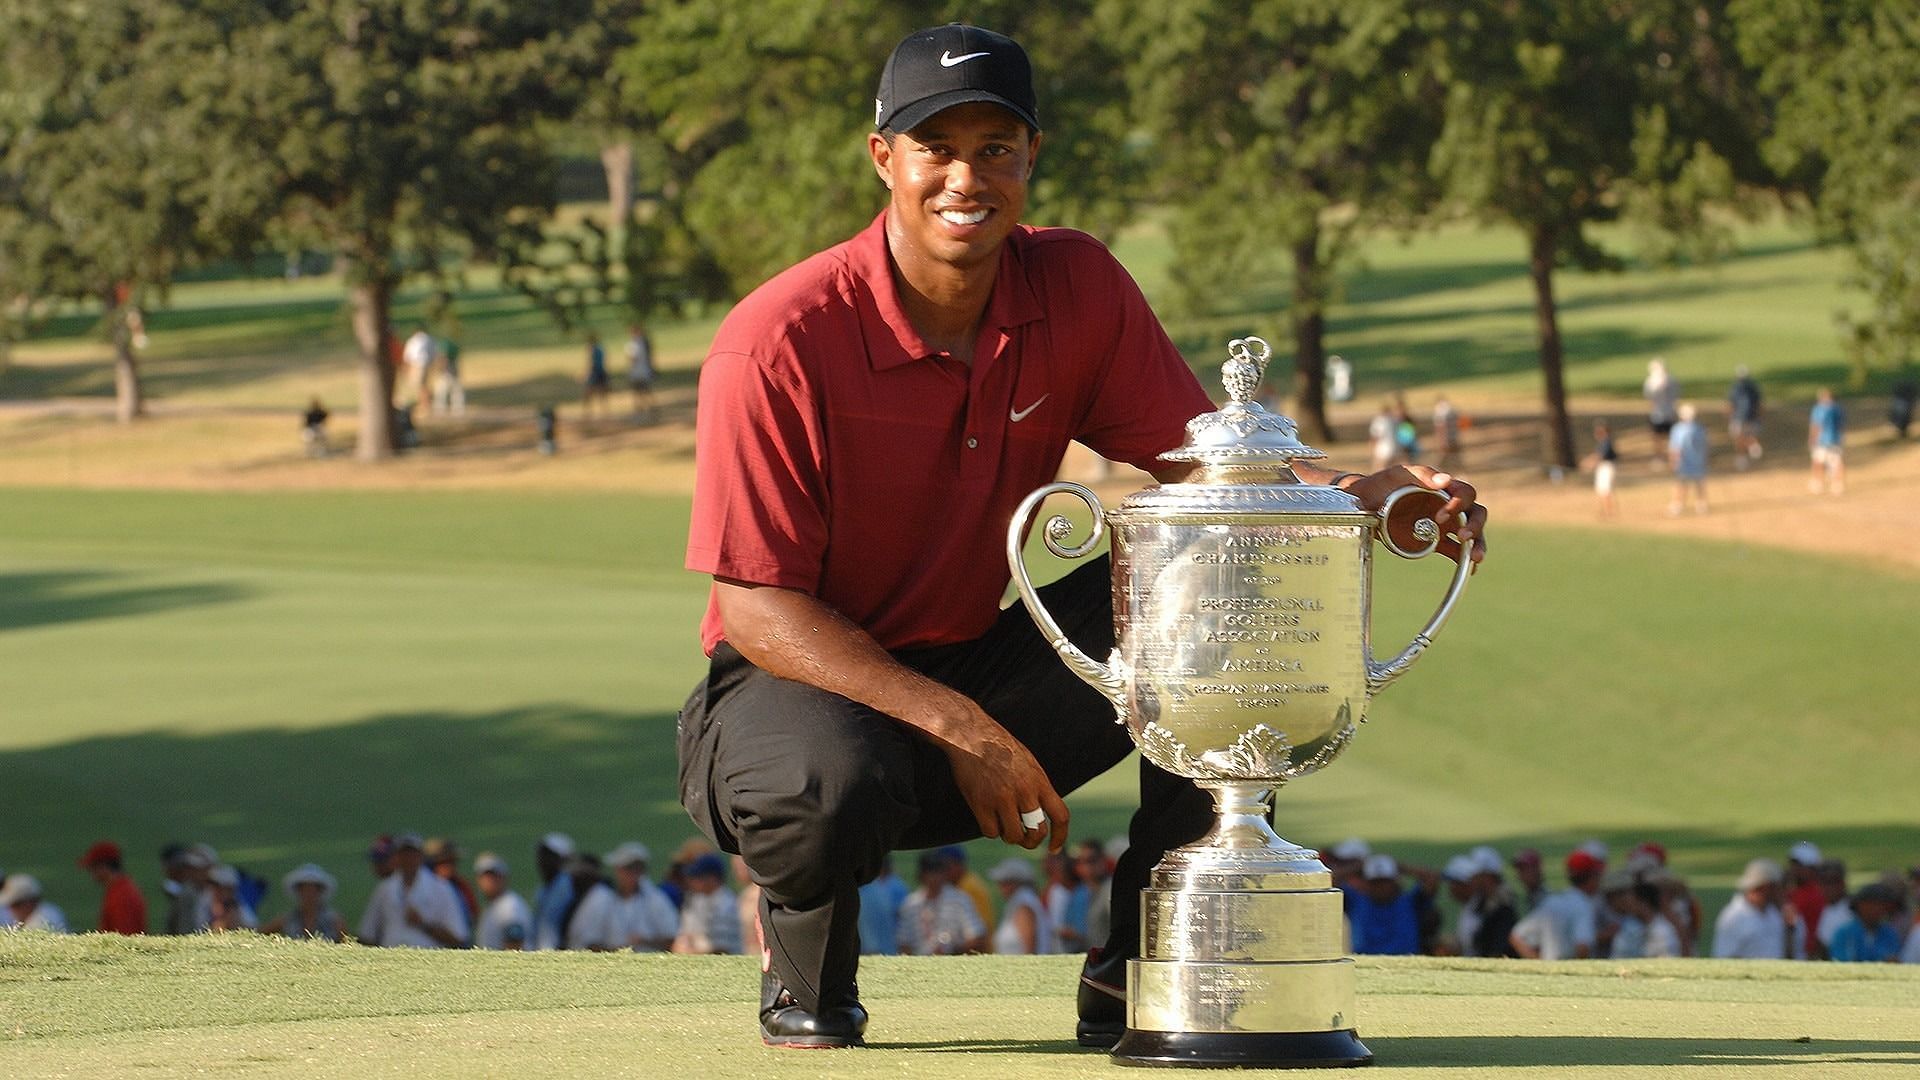 Tiger Woods won his fourth PGA Championship title in 2007(Image via Getty)